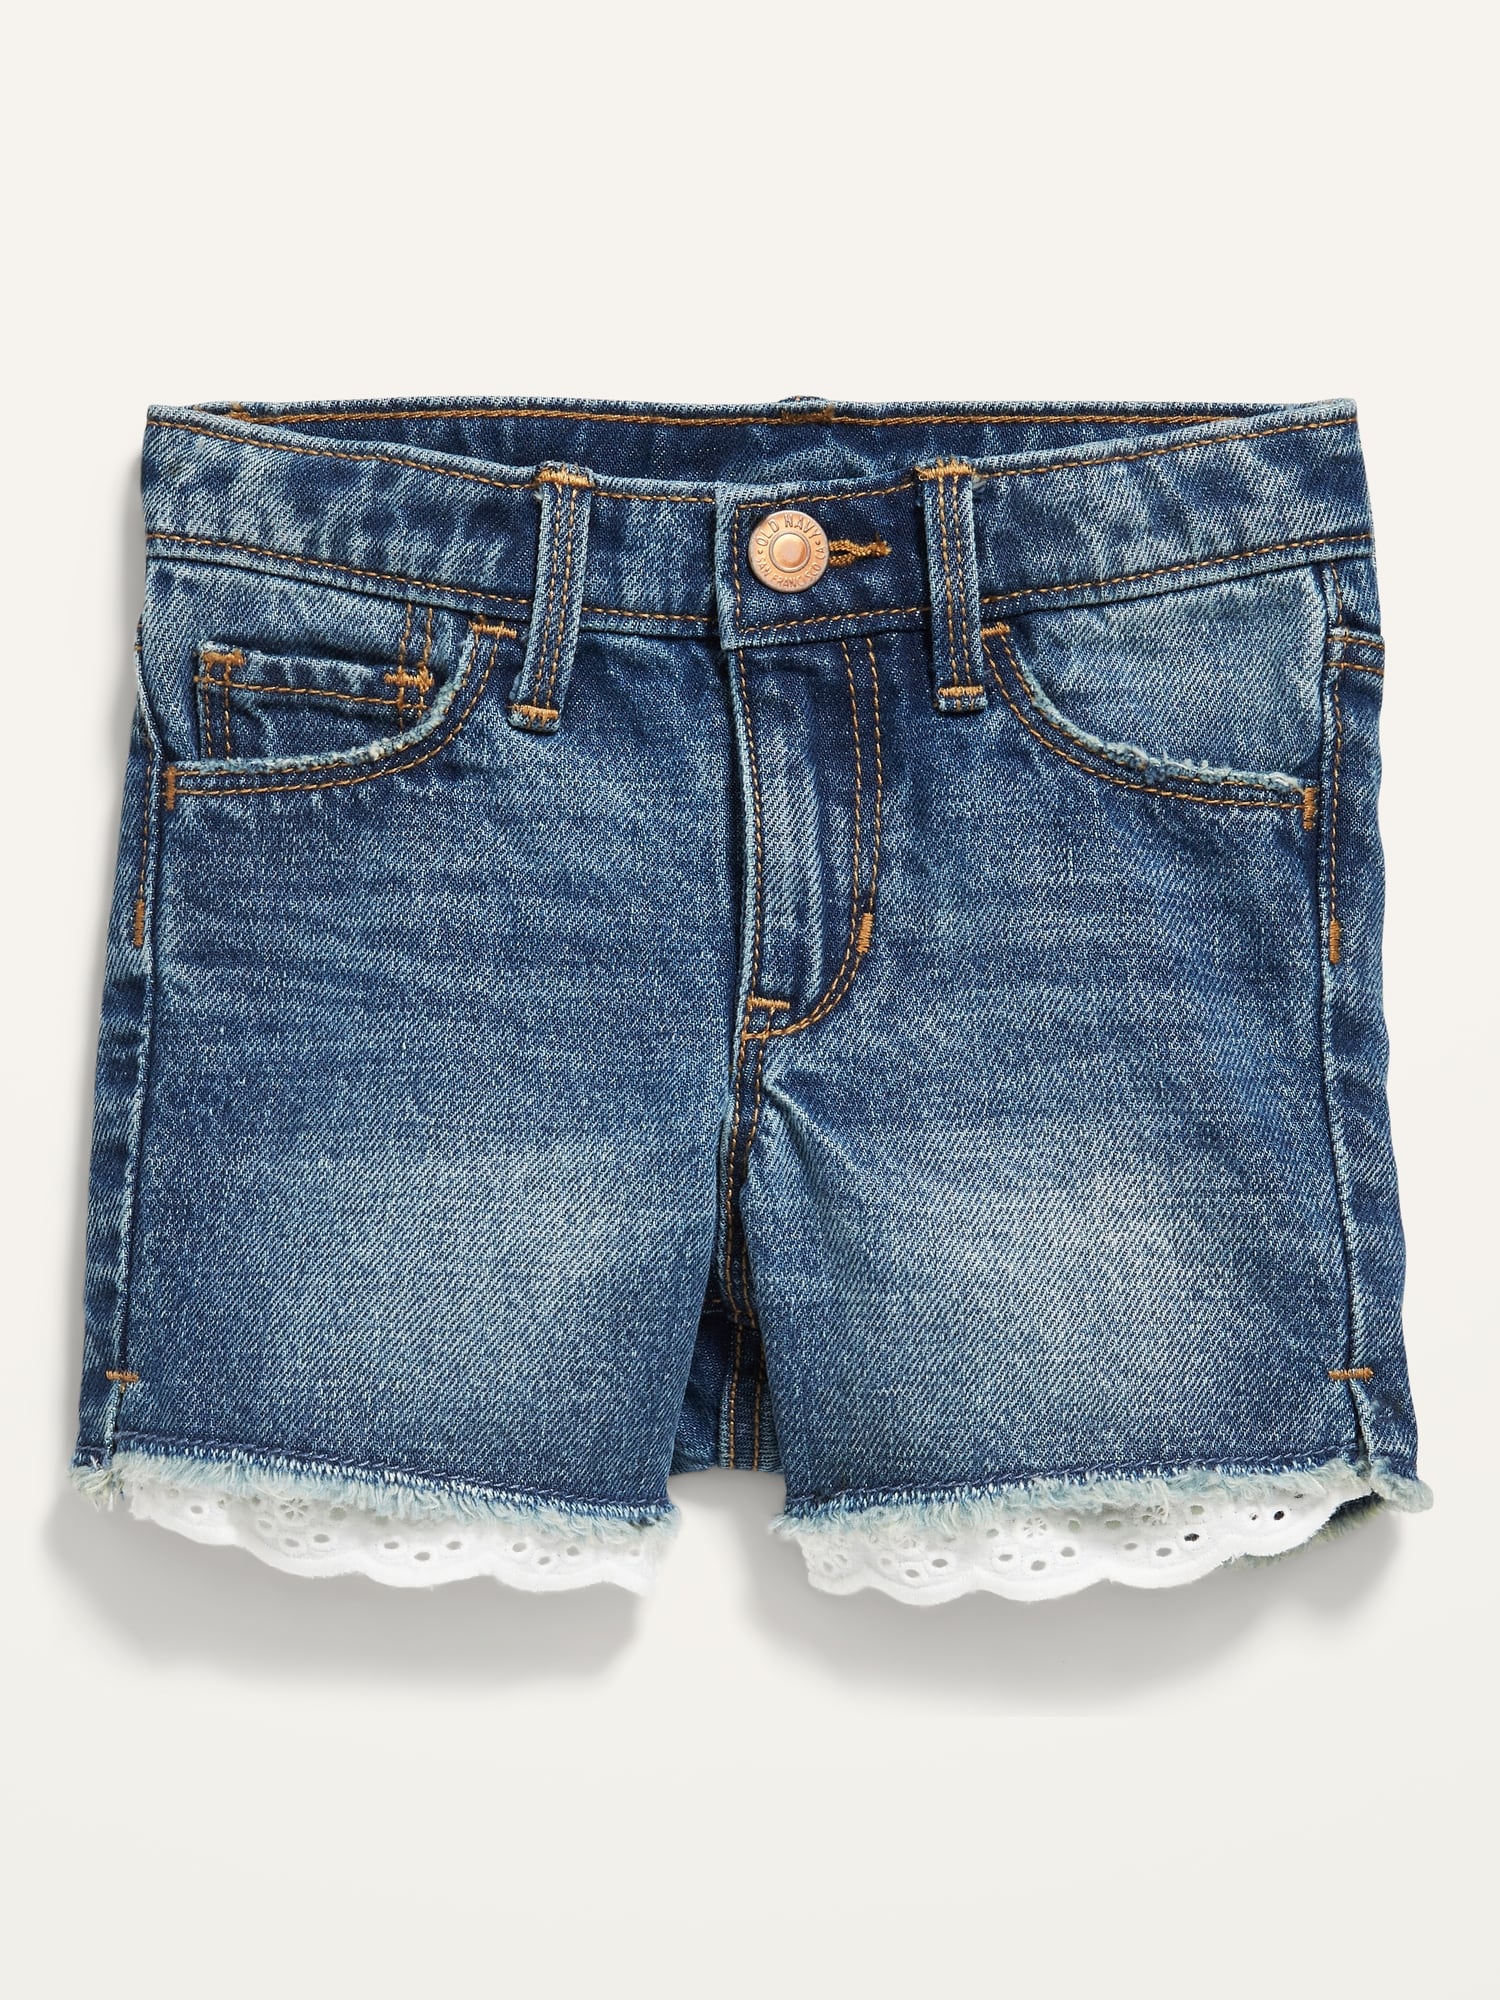 Lace-Trim Jean Cut-Off Shorts for Toddler Girls | Old Navy